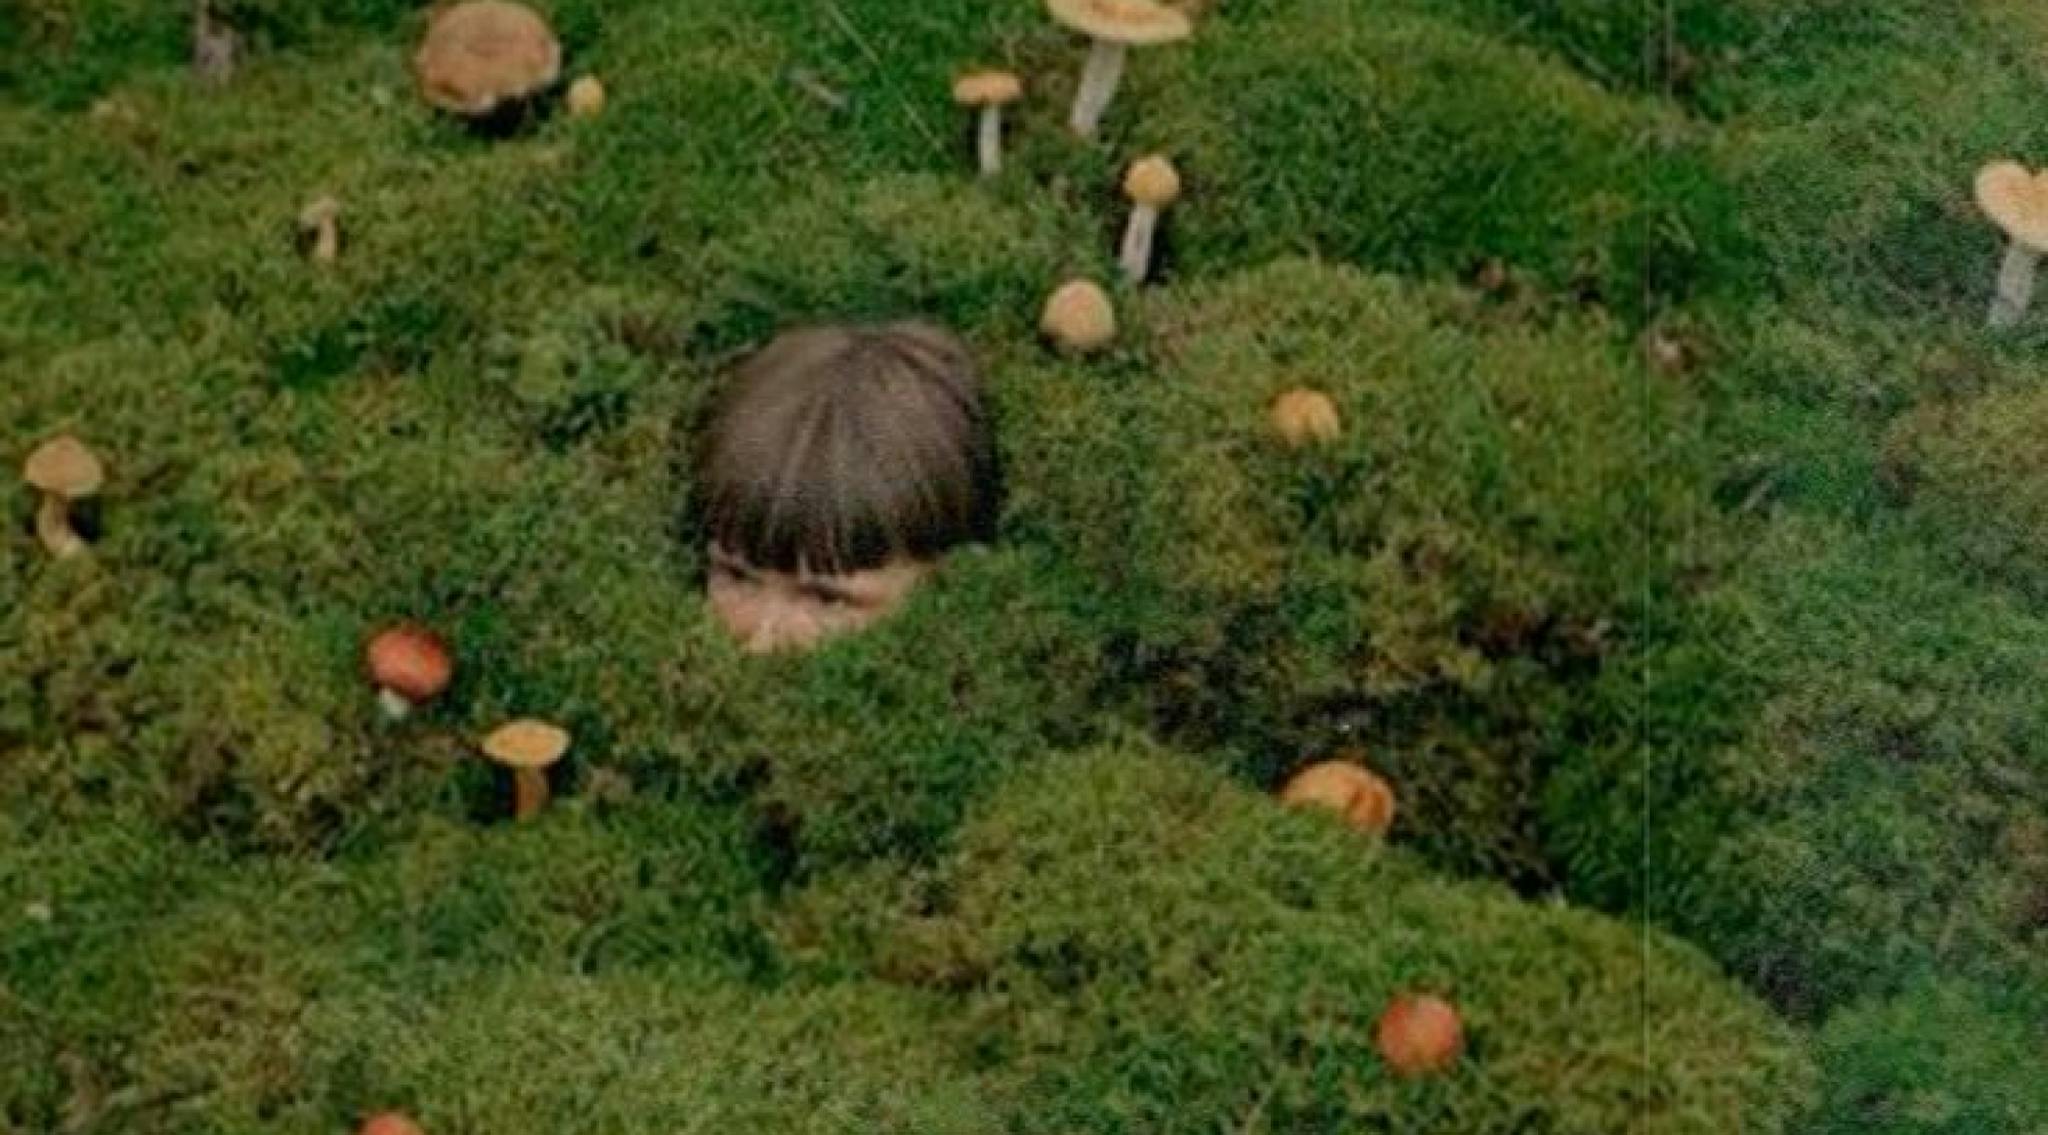 the image depicts a woman disappearing in moss that is strewn with mushrooms 